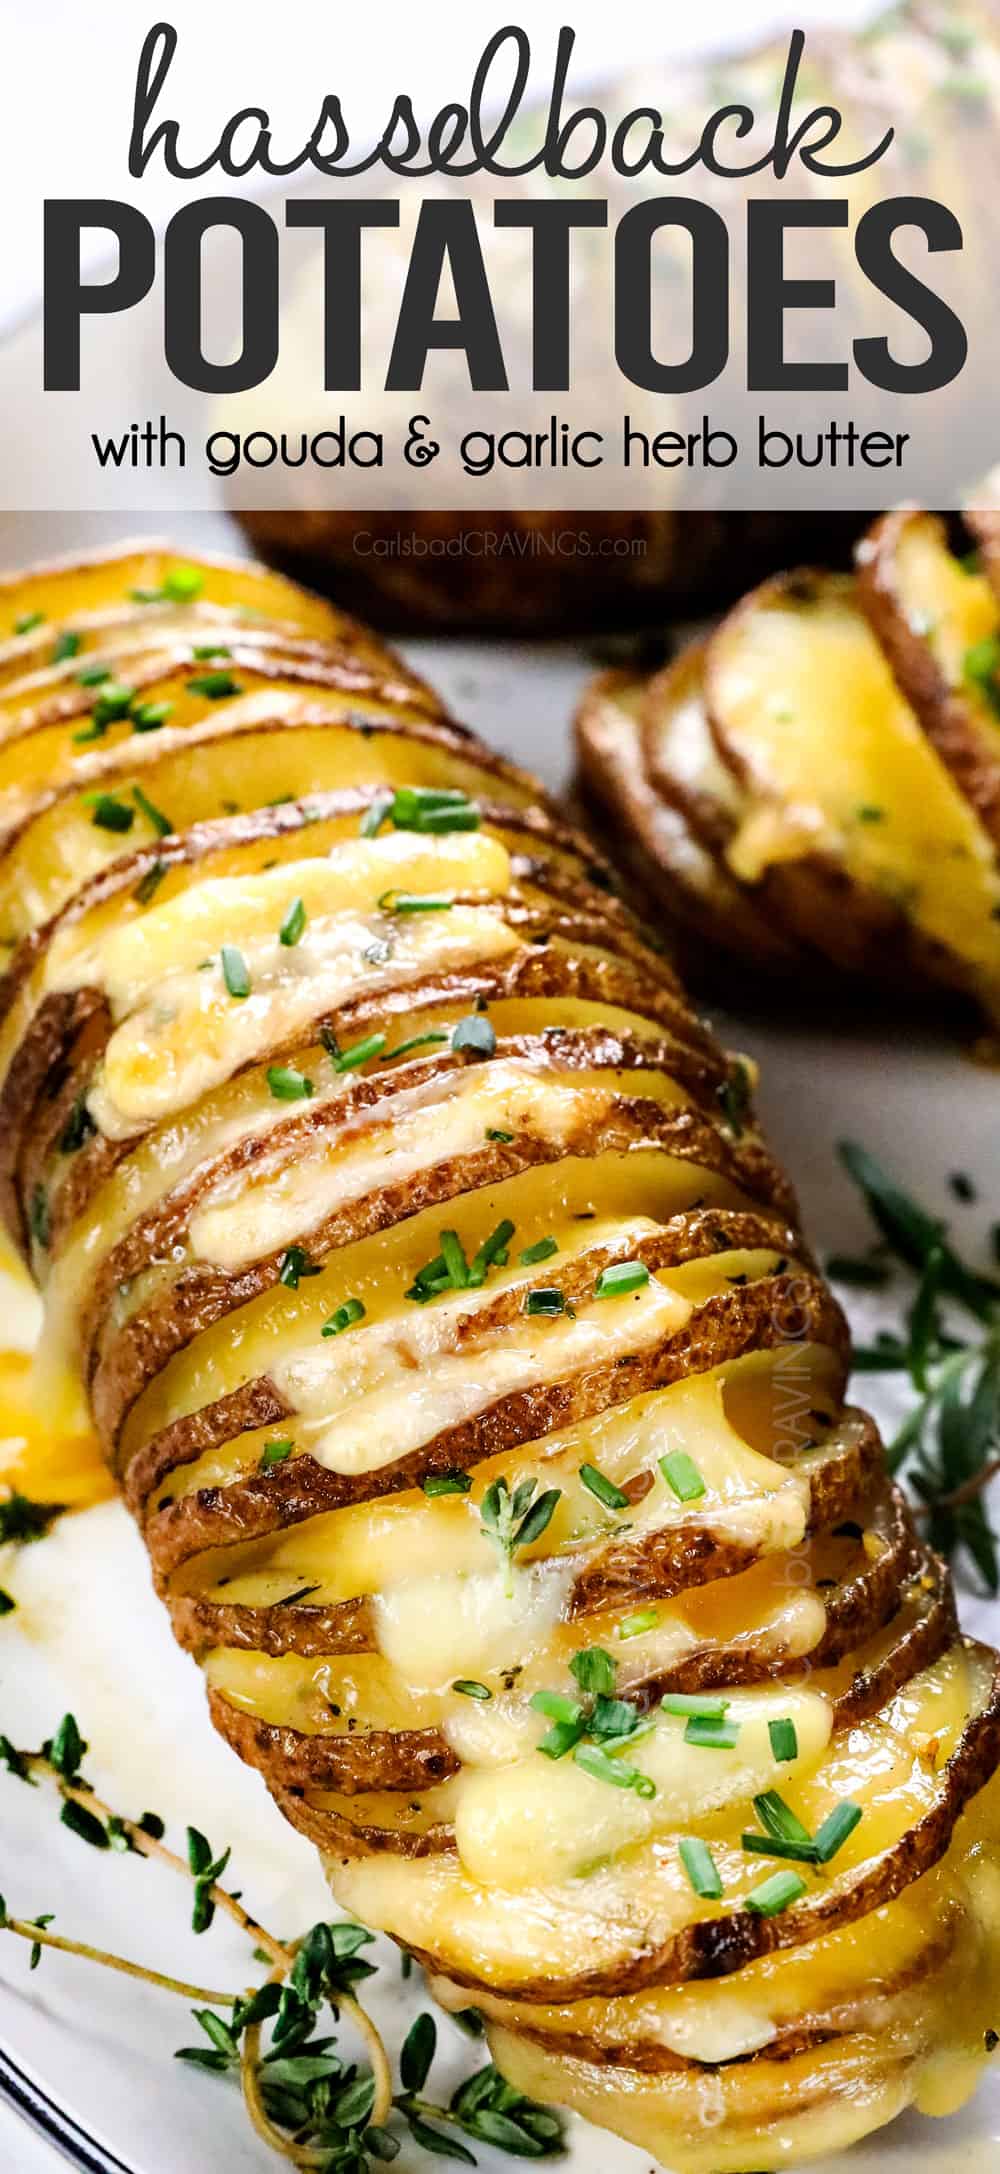 up close of a Hasselback potato cut into thin slices then stuffed with melted cheese